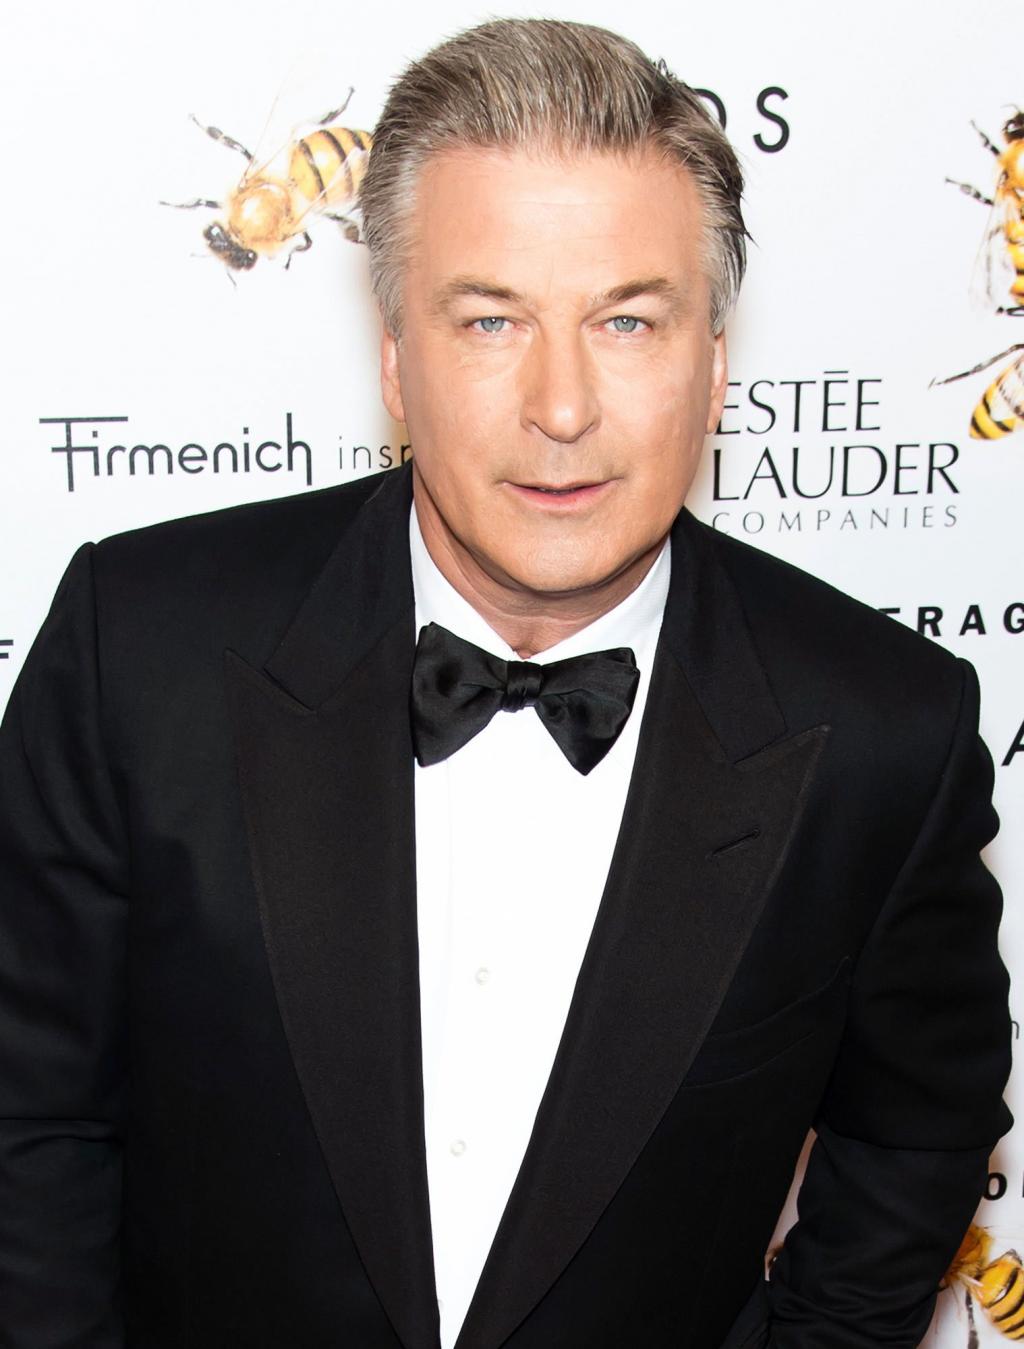 Alec Baldwin Opens Up About Suffering From Lyme Disease and Thinking He Was Going to Die